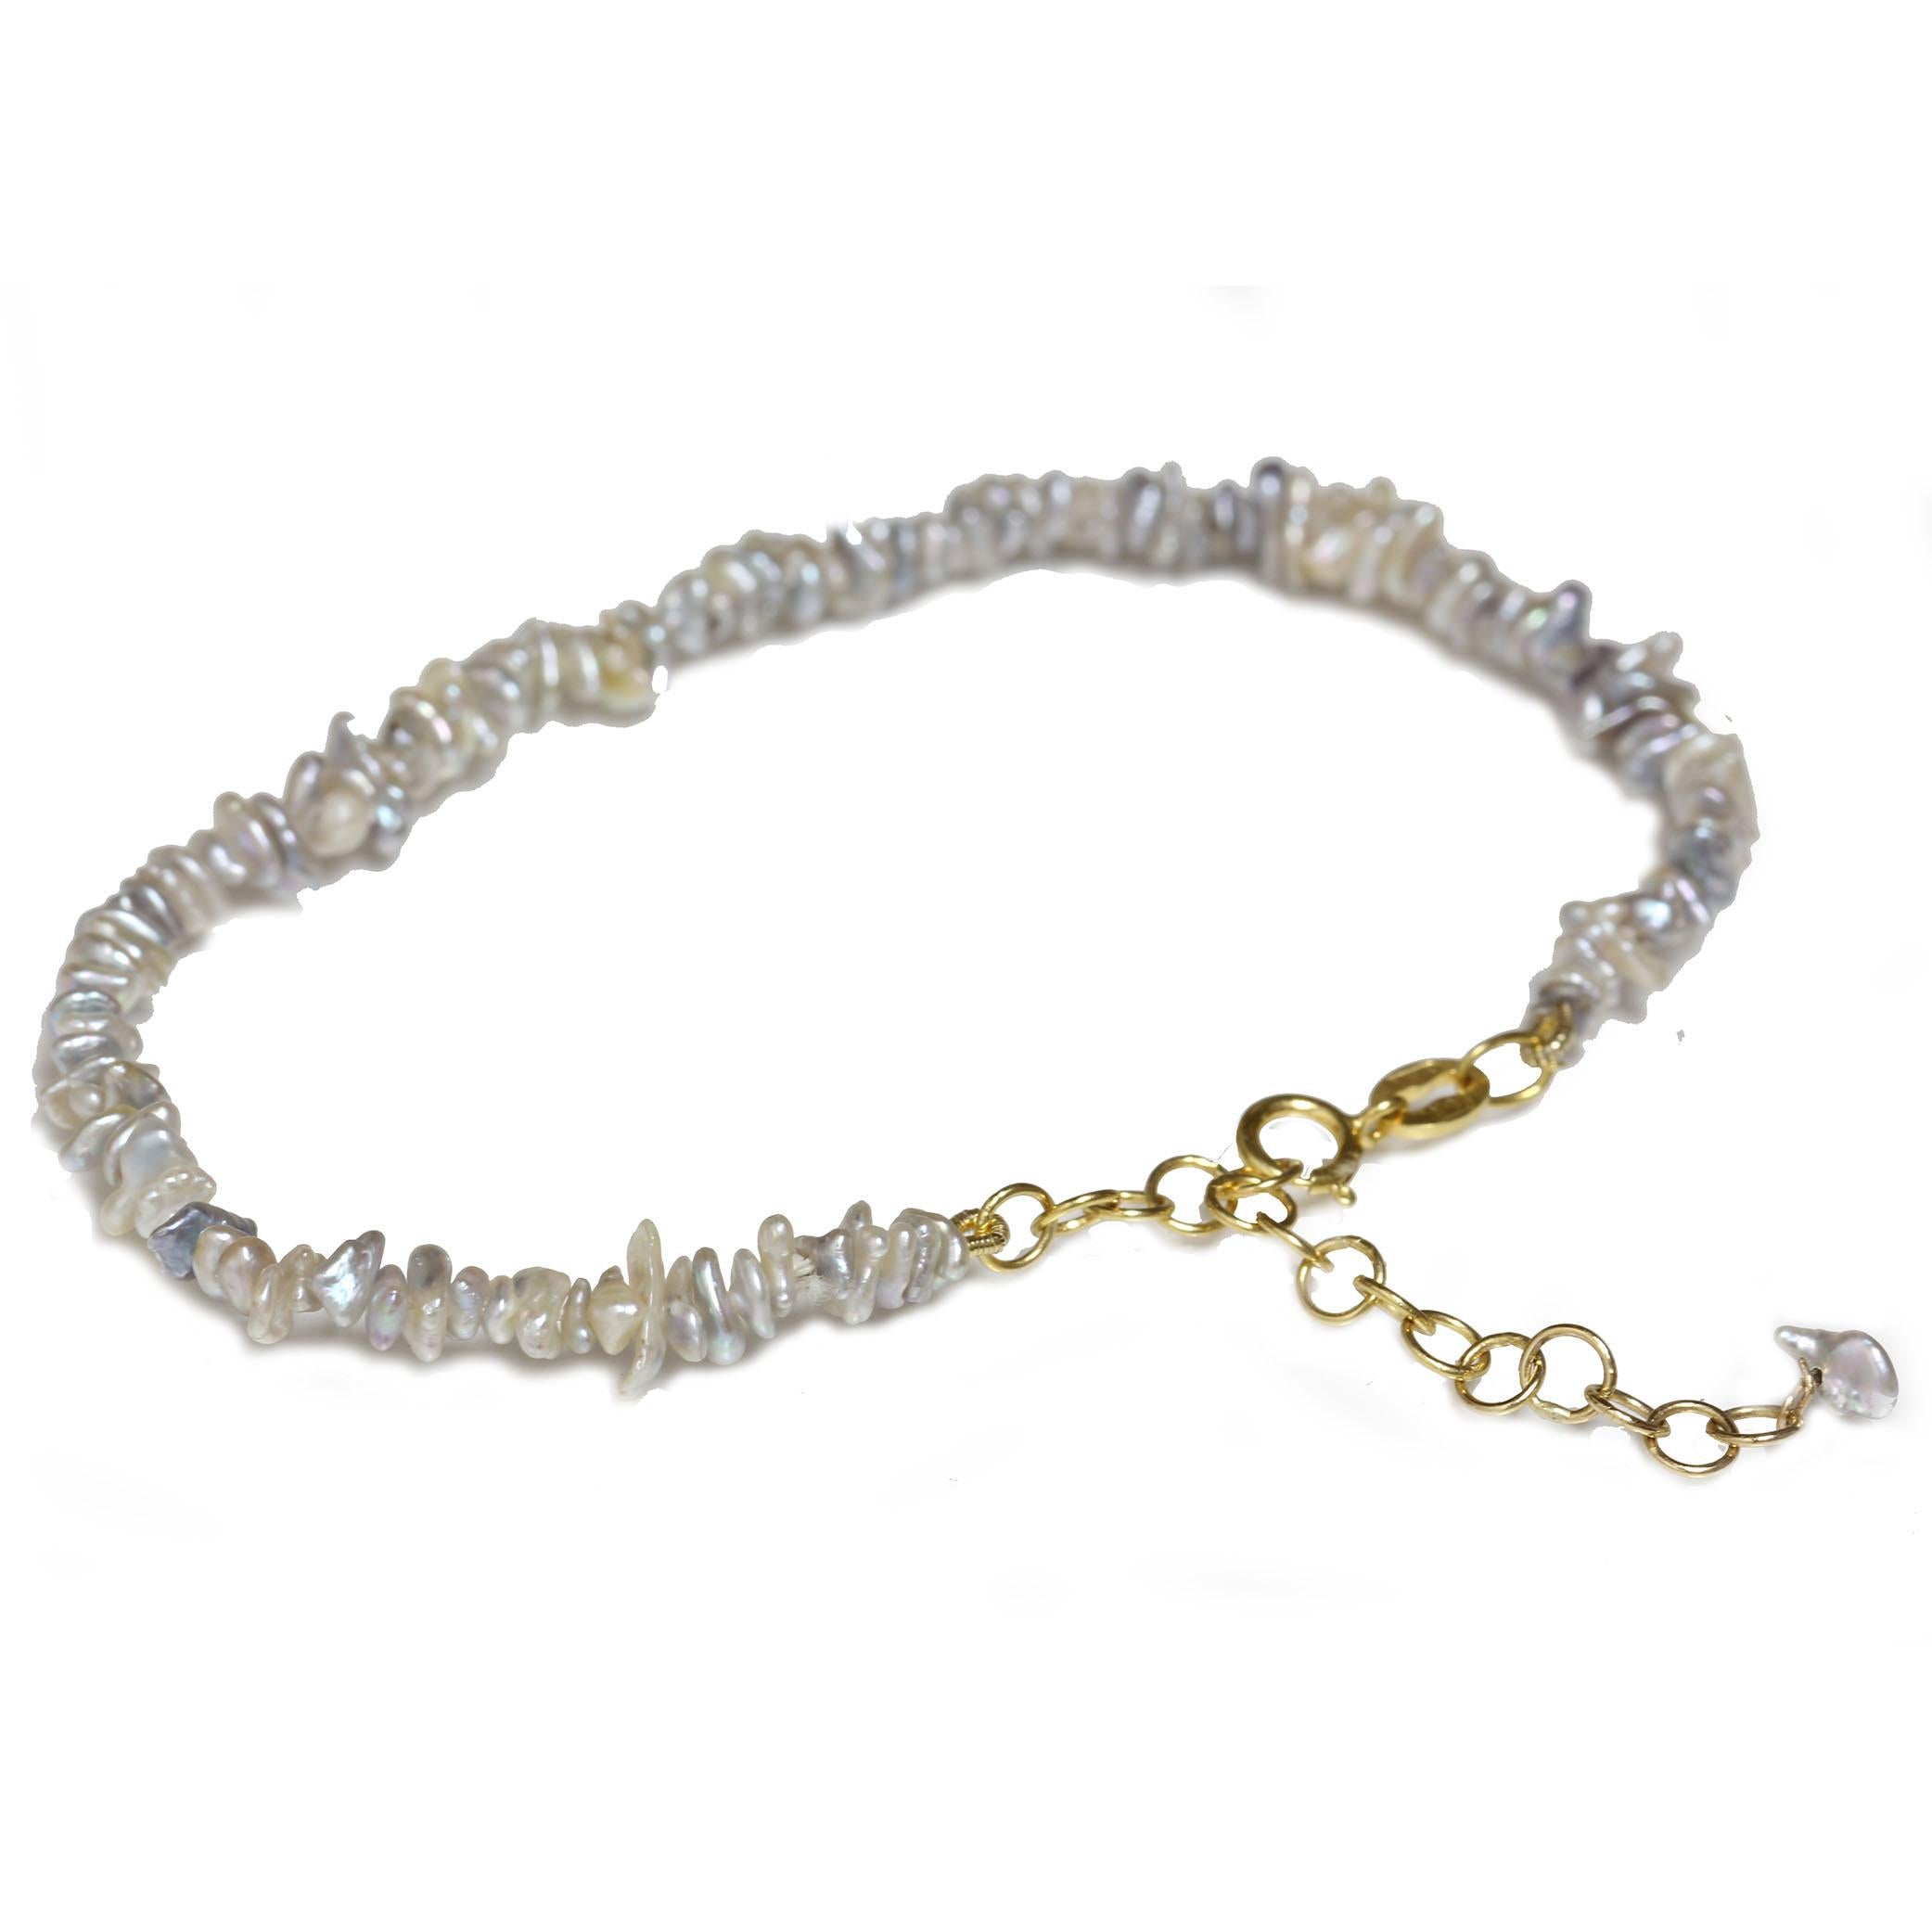 Dainty akoya keshi pearl bracelet 3 - 4mm, The shape is baroque and the color is natural silver blue.  Very high luster and quality. The total length is 7